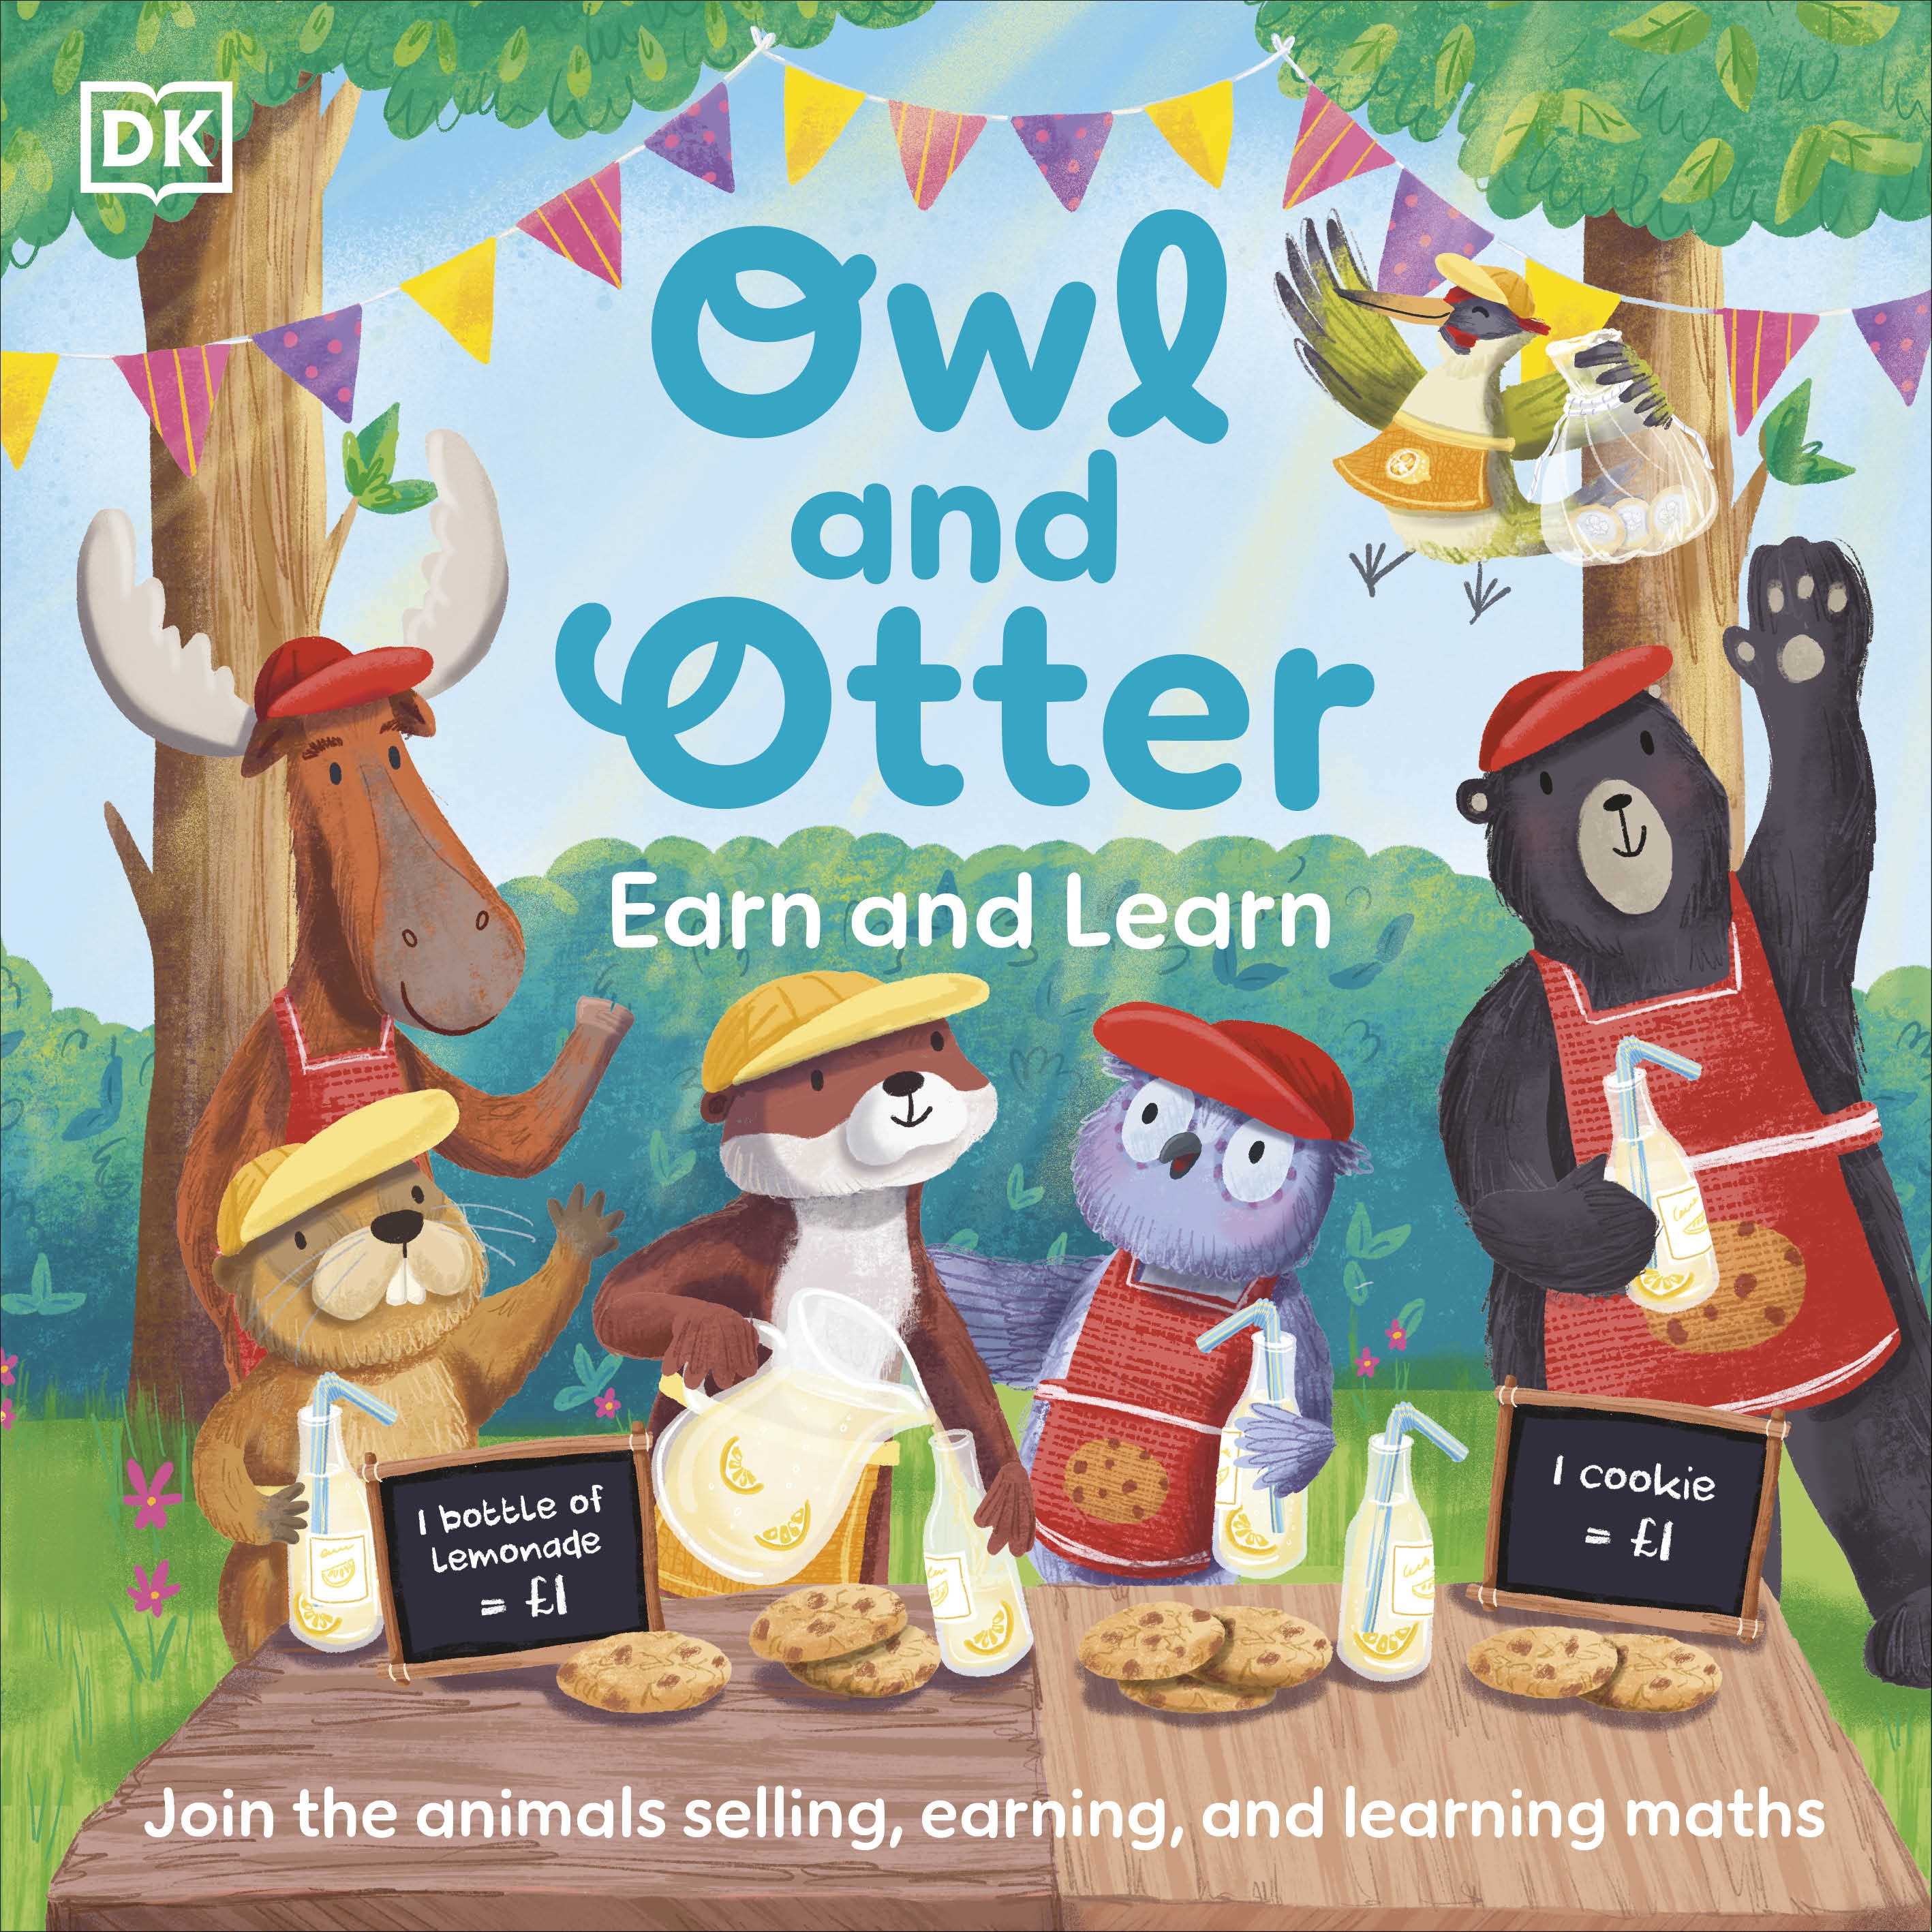 Earn and Learn (Owl and Otter) (Phonic Books Intervention Decodables)